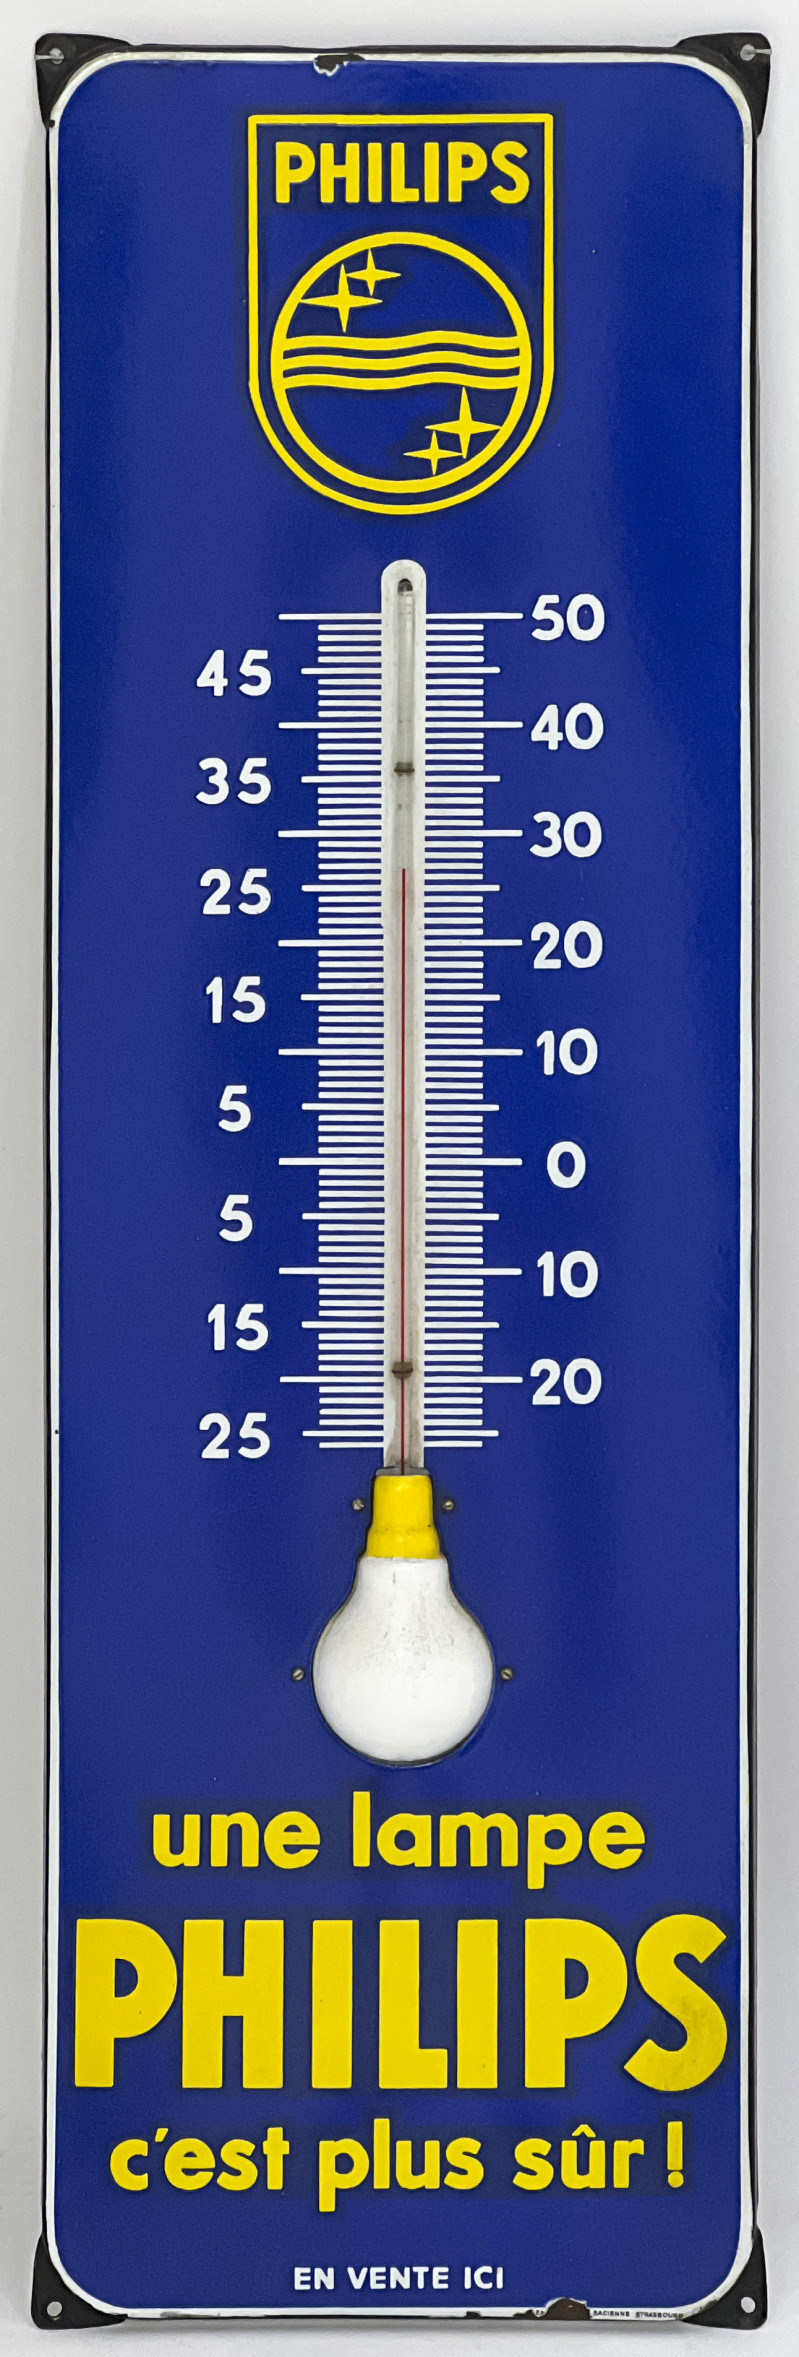 Phillips Thermometer Sign